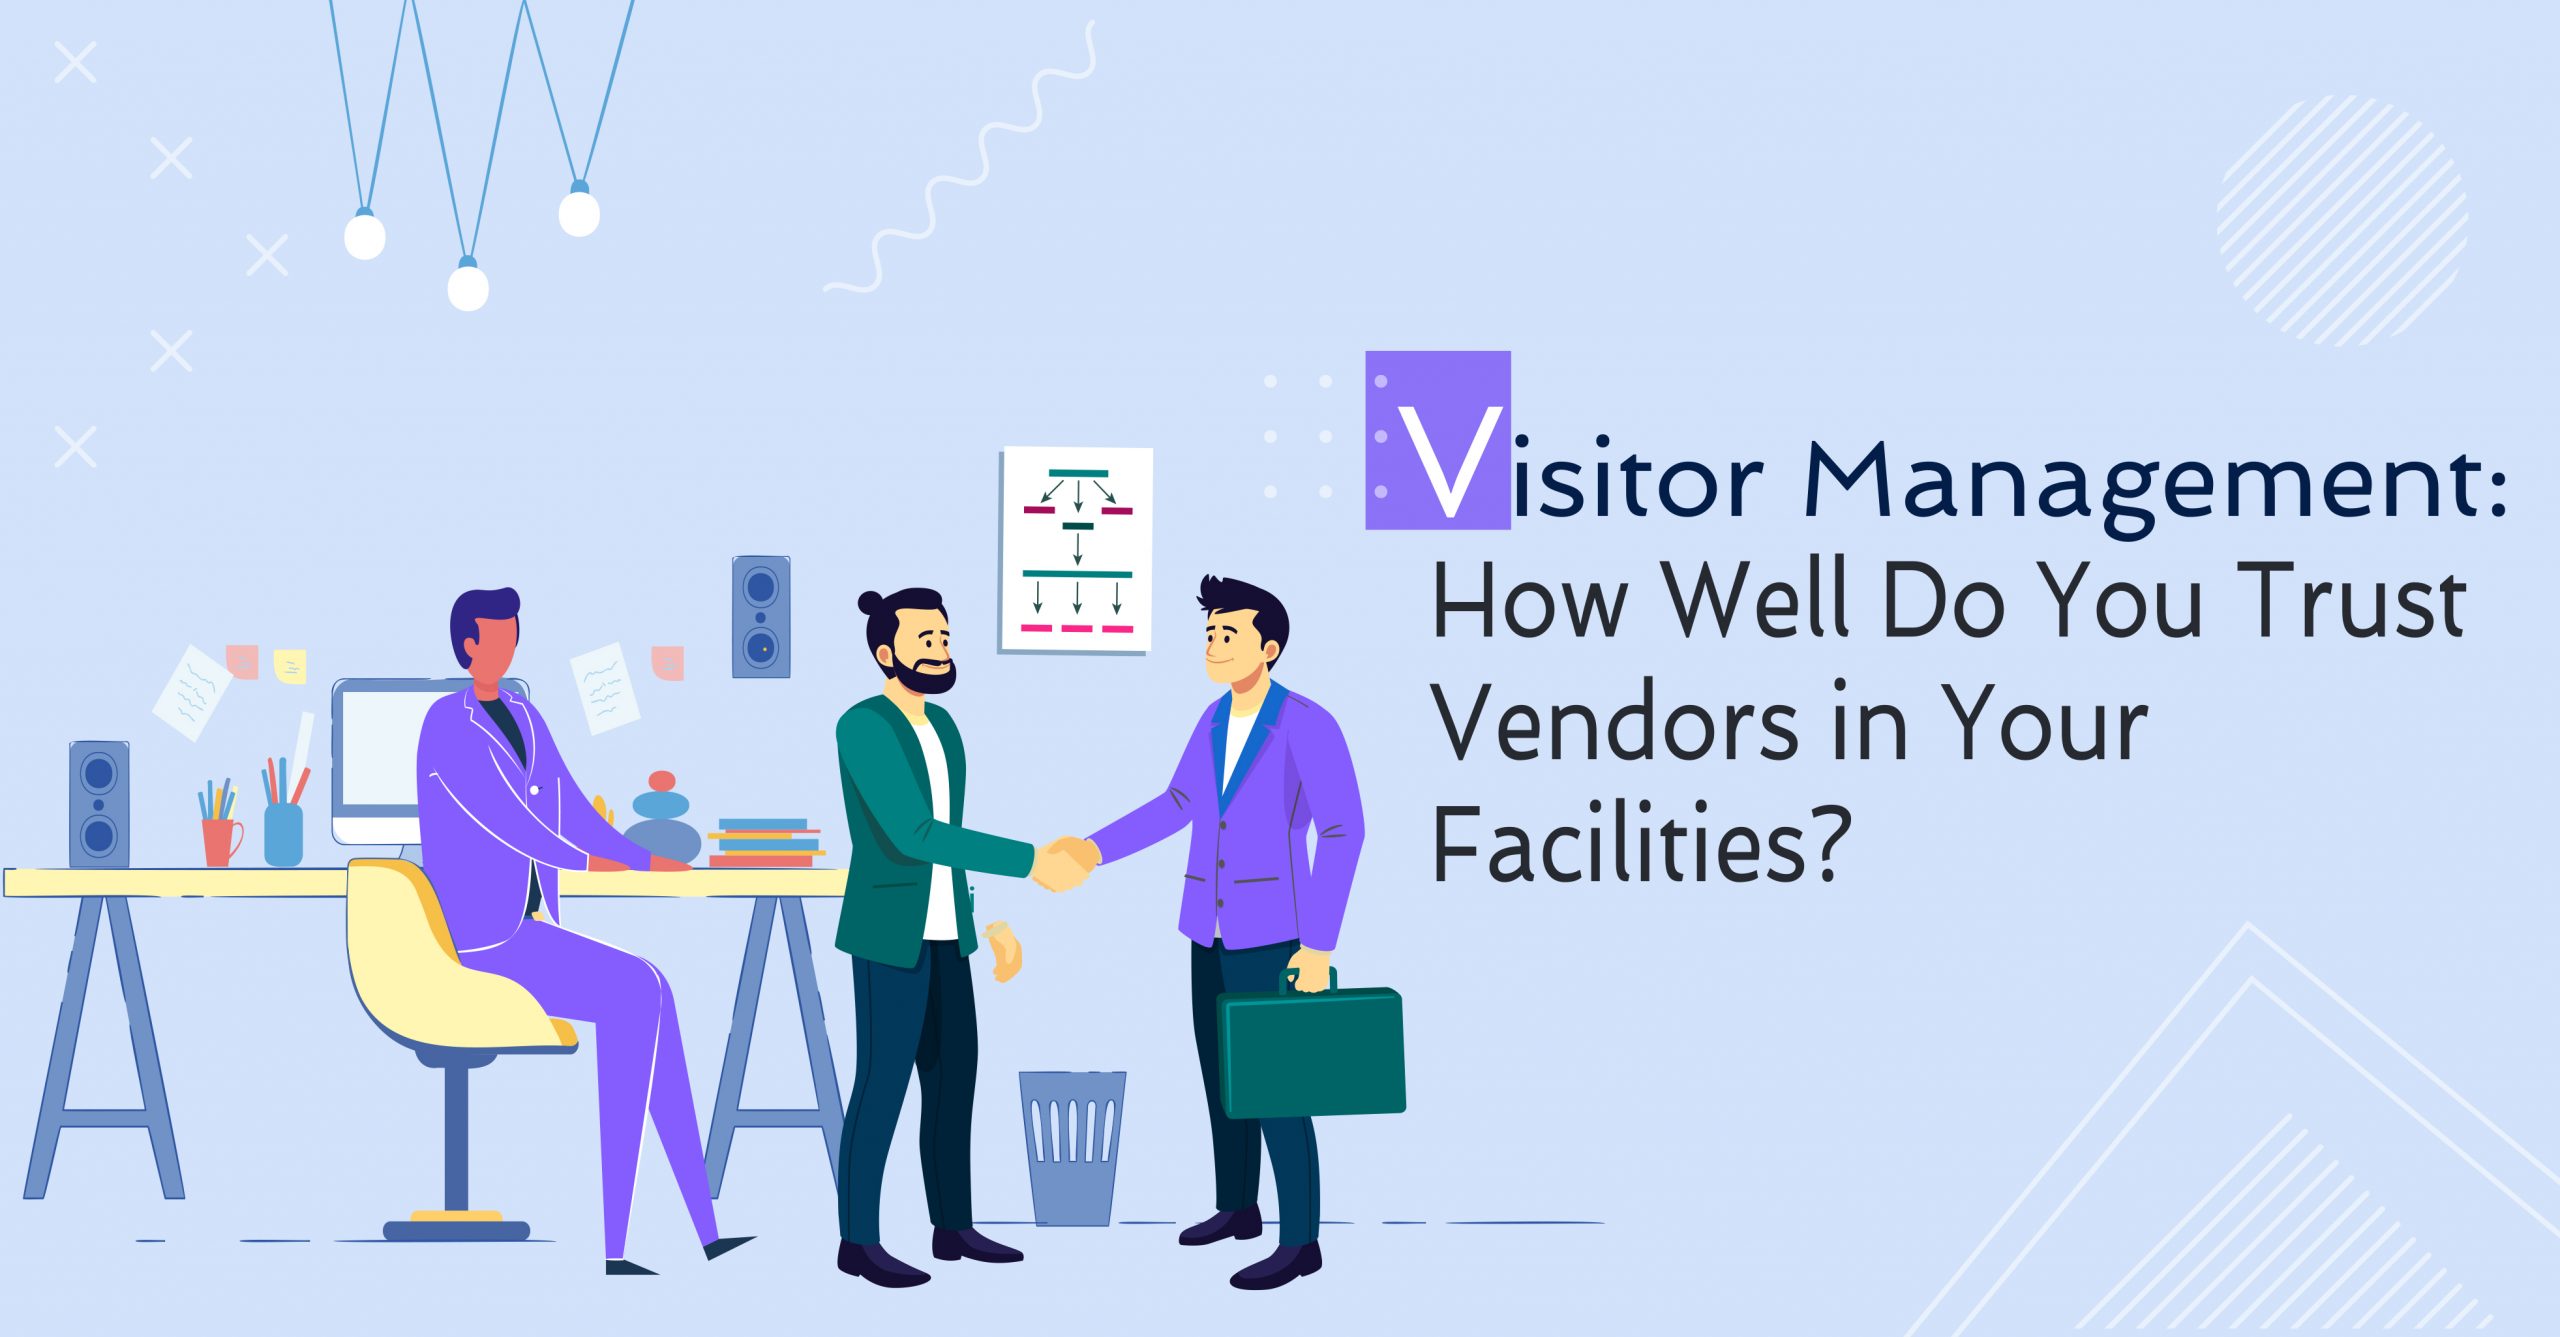 Visitor Management How Well Do You Trust Vendors in Your Facilities?